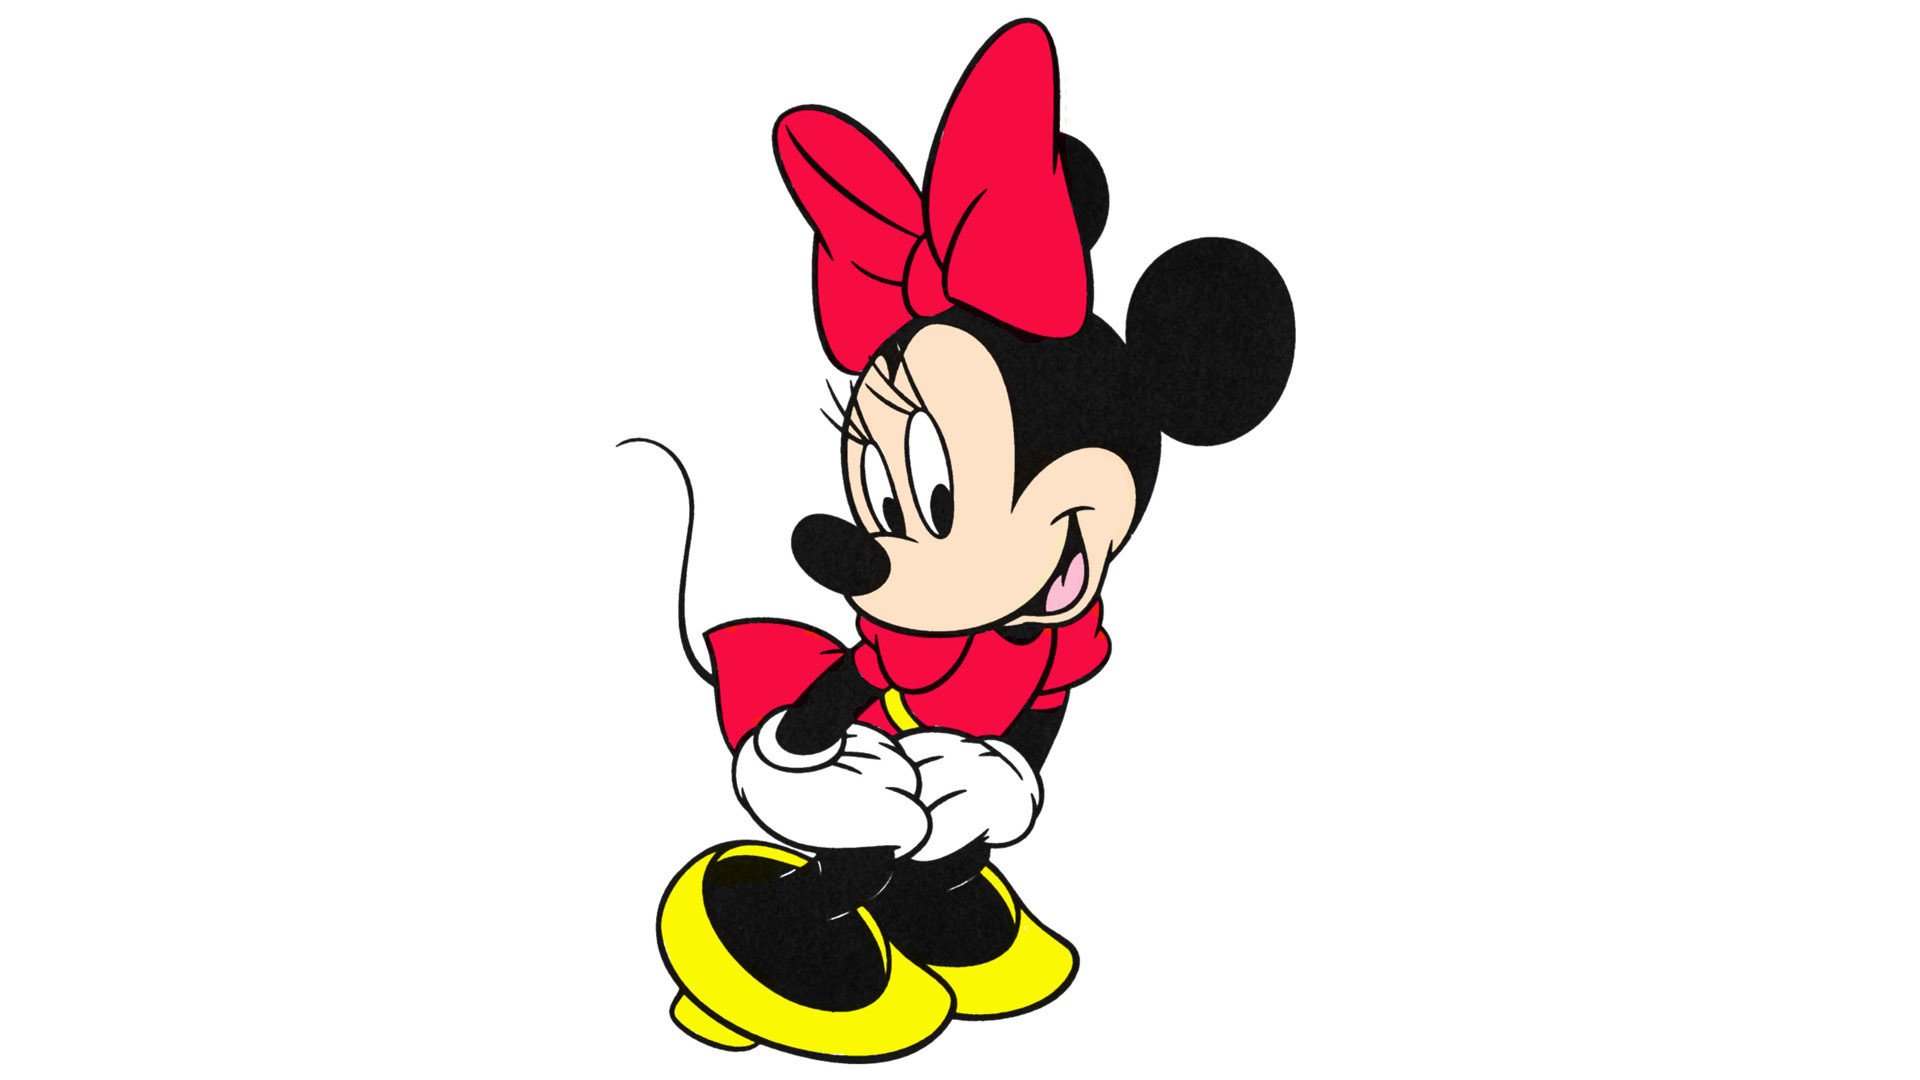 Minnie Mouse, Minnie wallpapers, Cute design, Lovely illustration, 1920x1080 Full HD Desktop